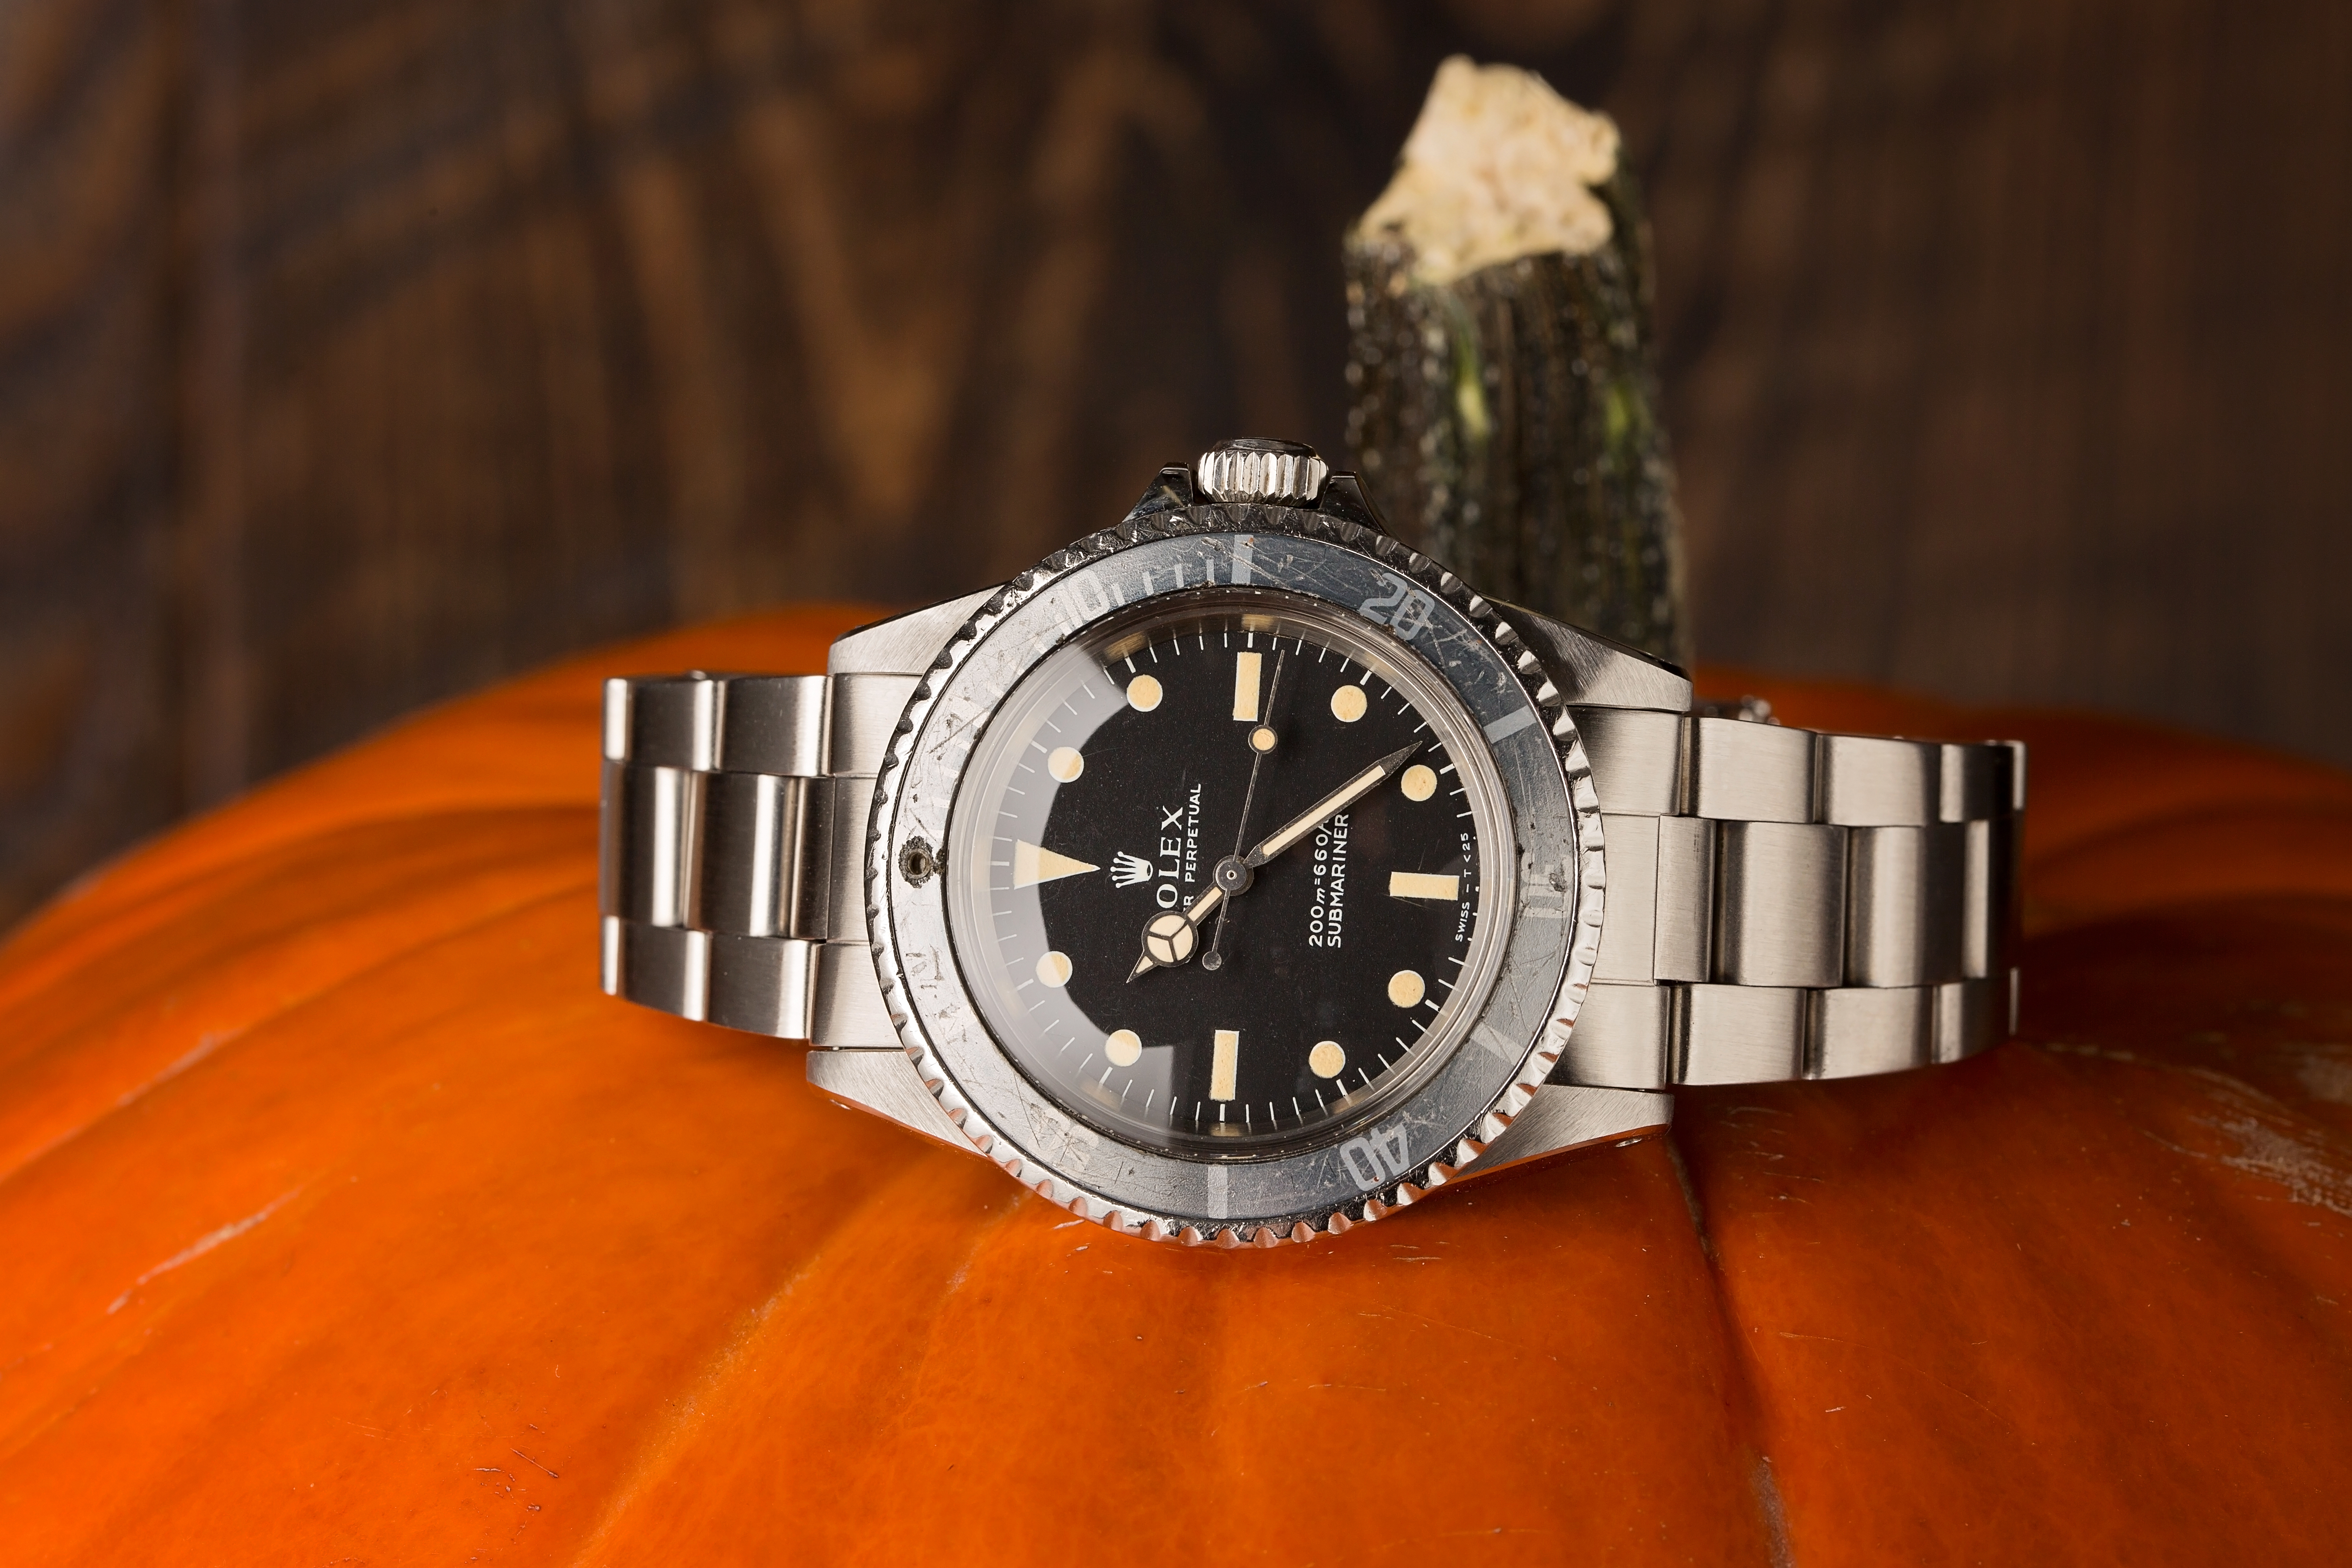 Ghost Bezel Rolex Watches: The perfect 